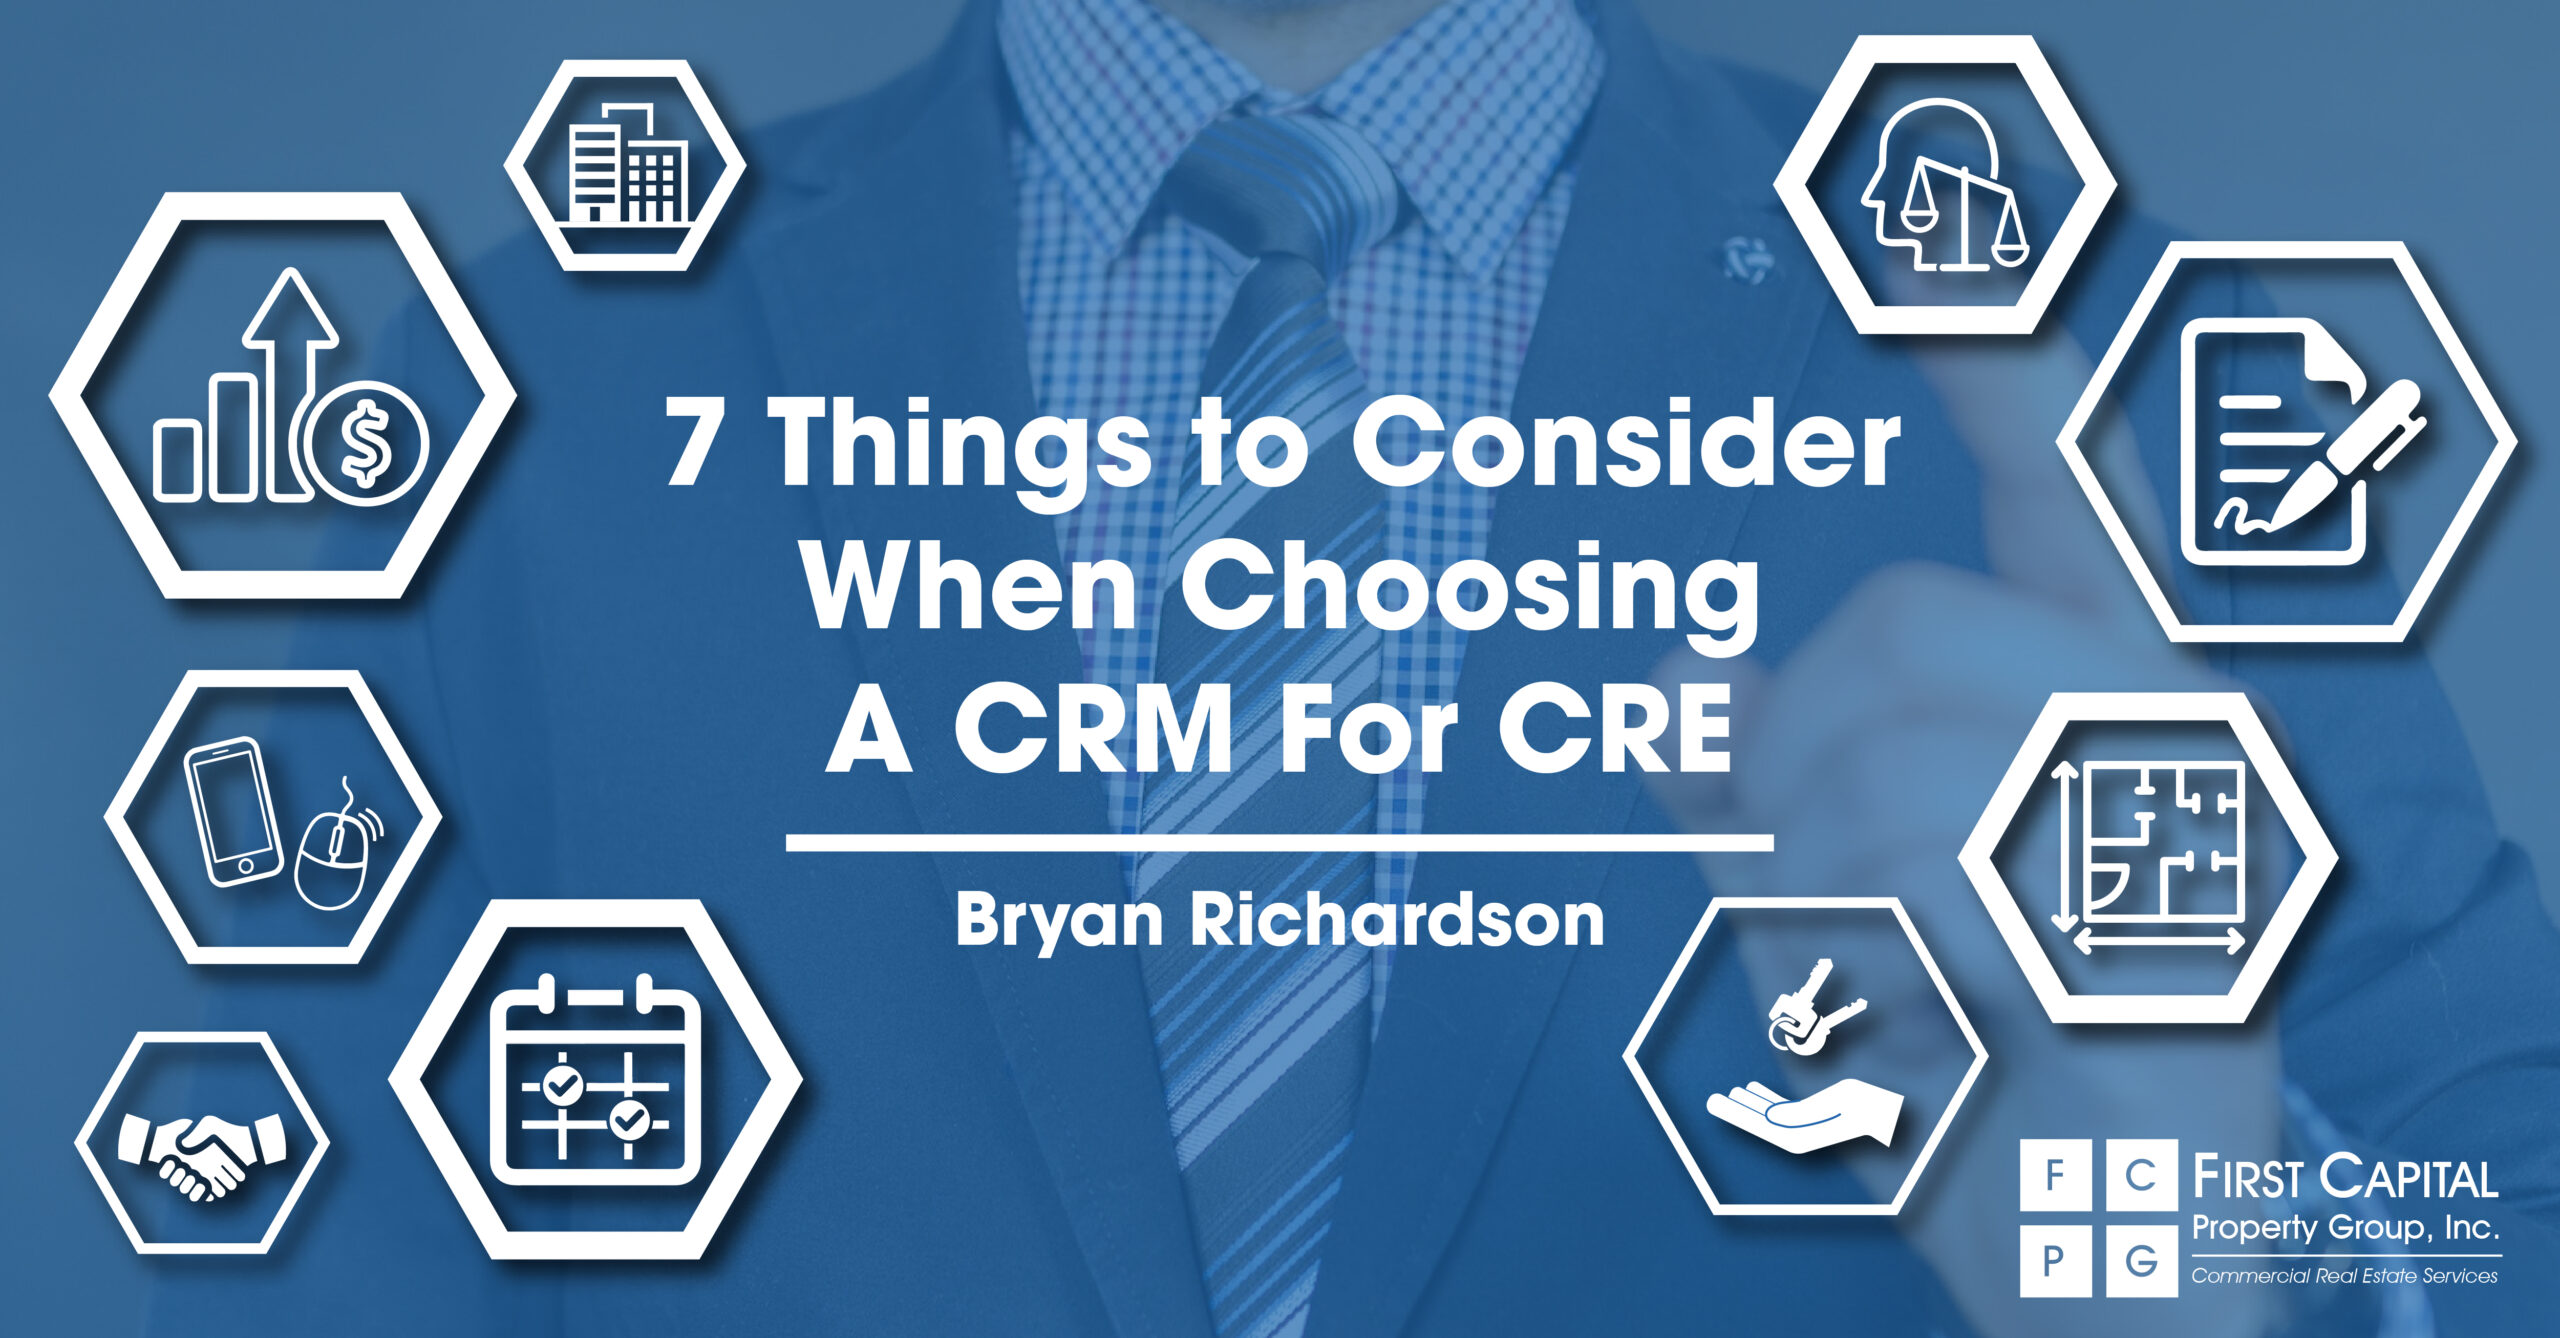 7 Things to Consider When Choosing a CRM for CRE